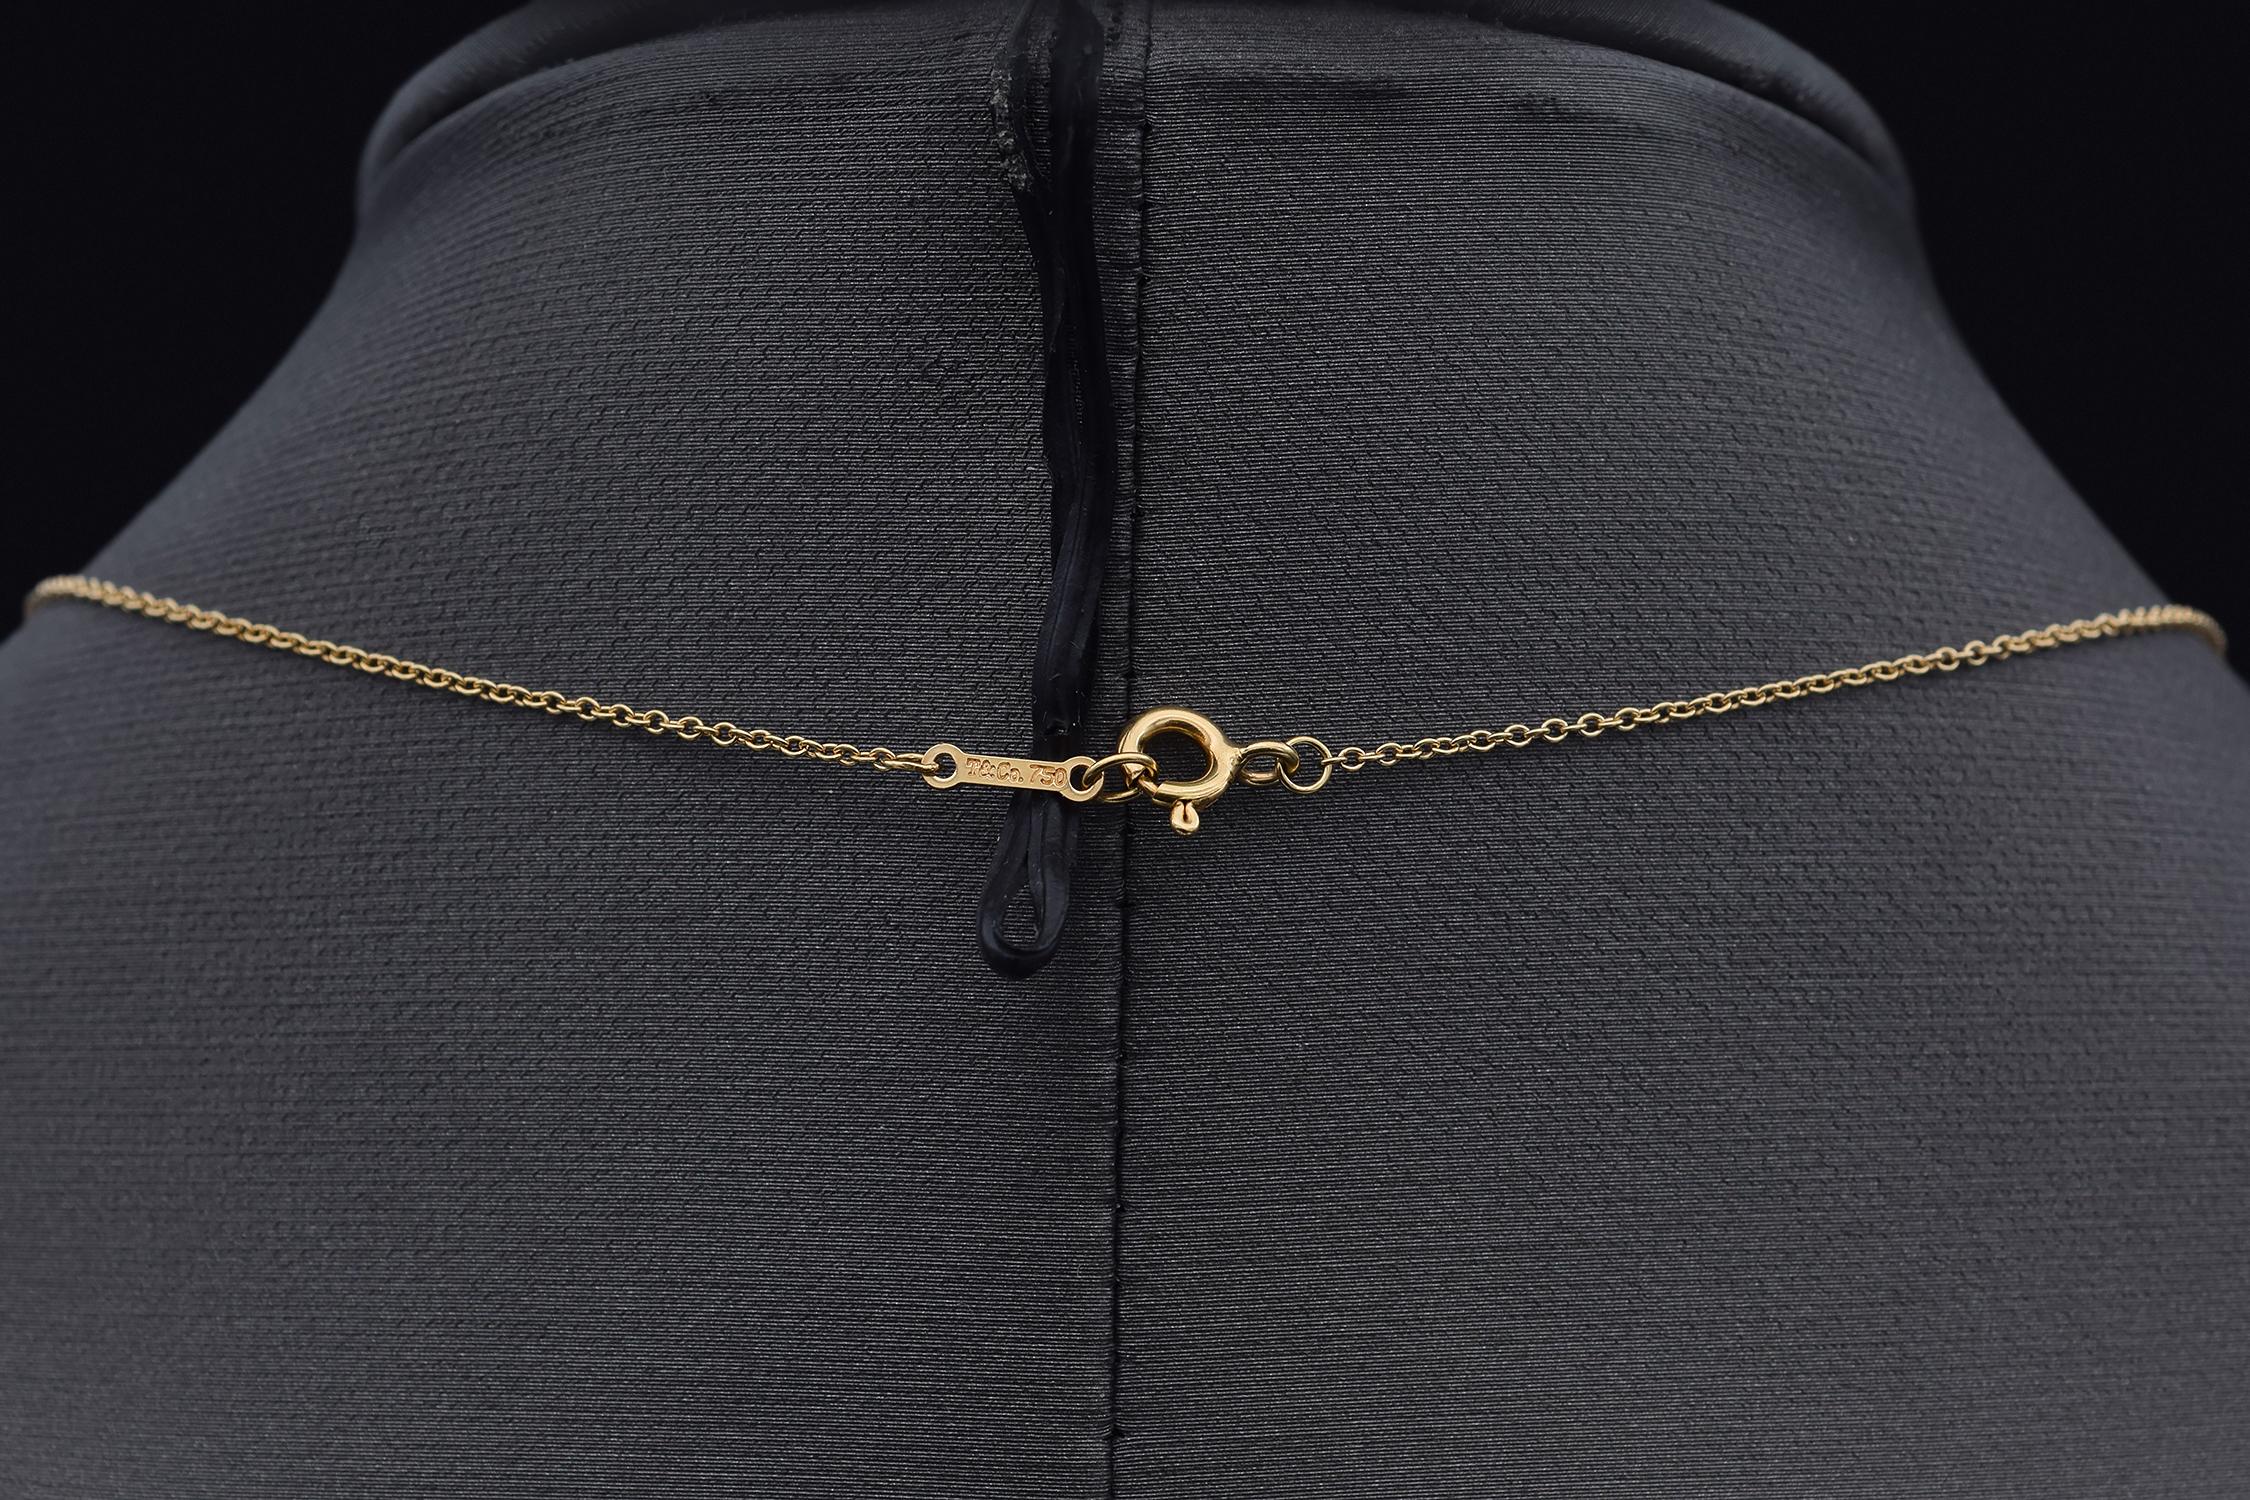 Tiffany & Co. Paloma Picasso Marrakesh Yellow Gold Pendant Necklace In Good Condition For Sale In New York, NY